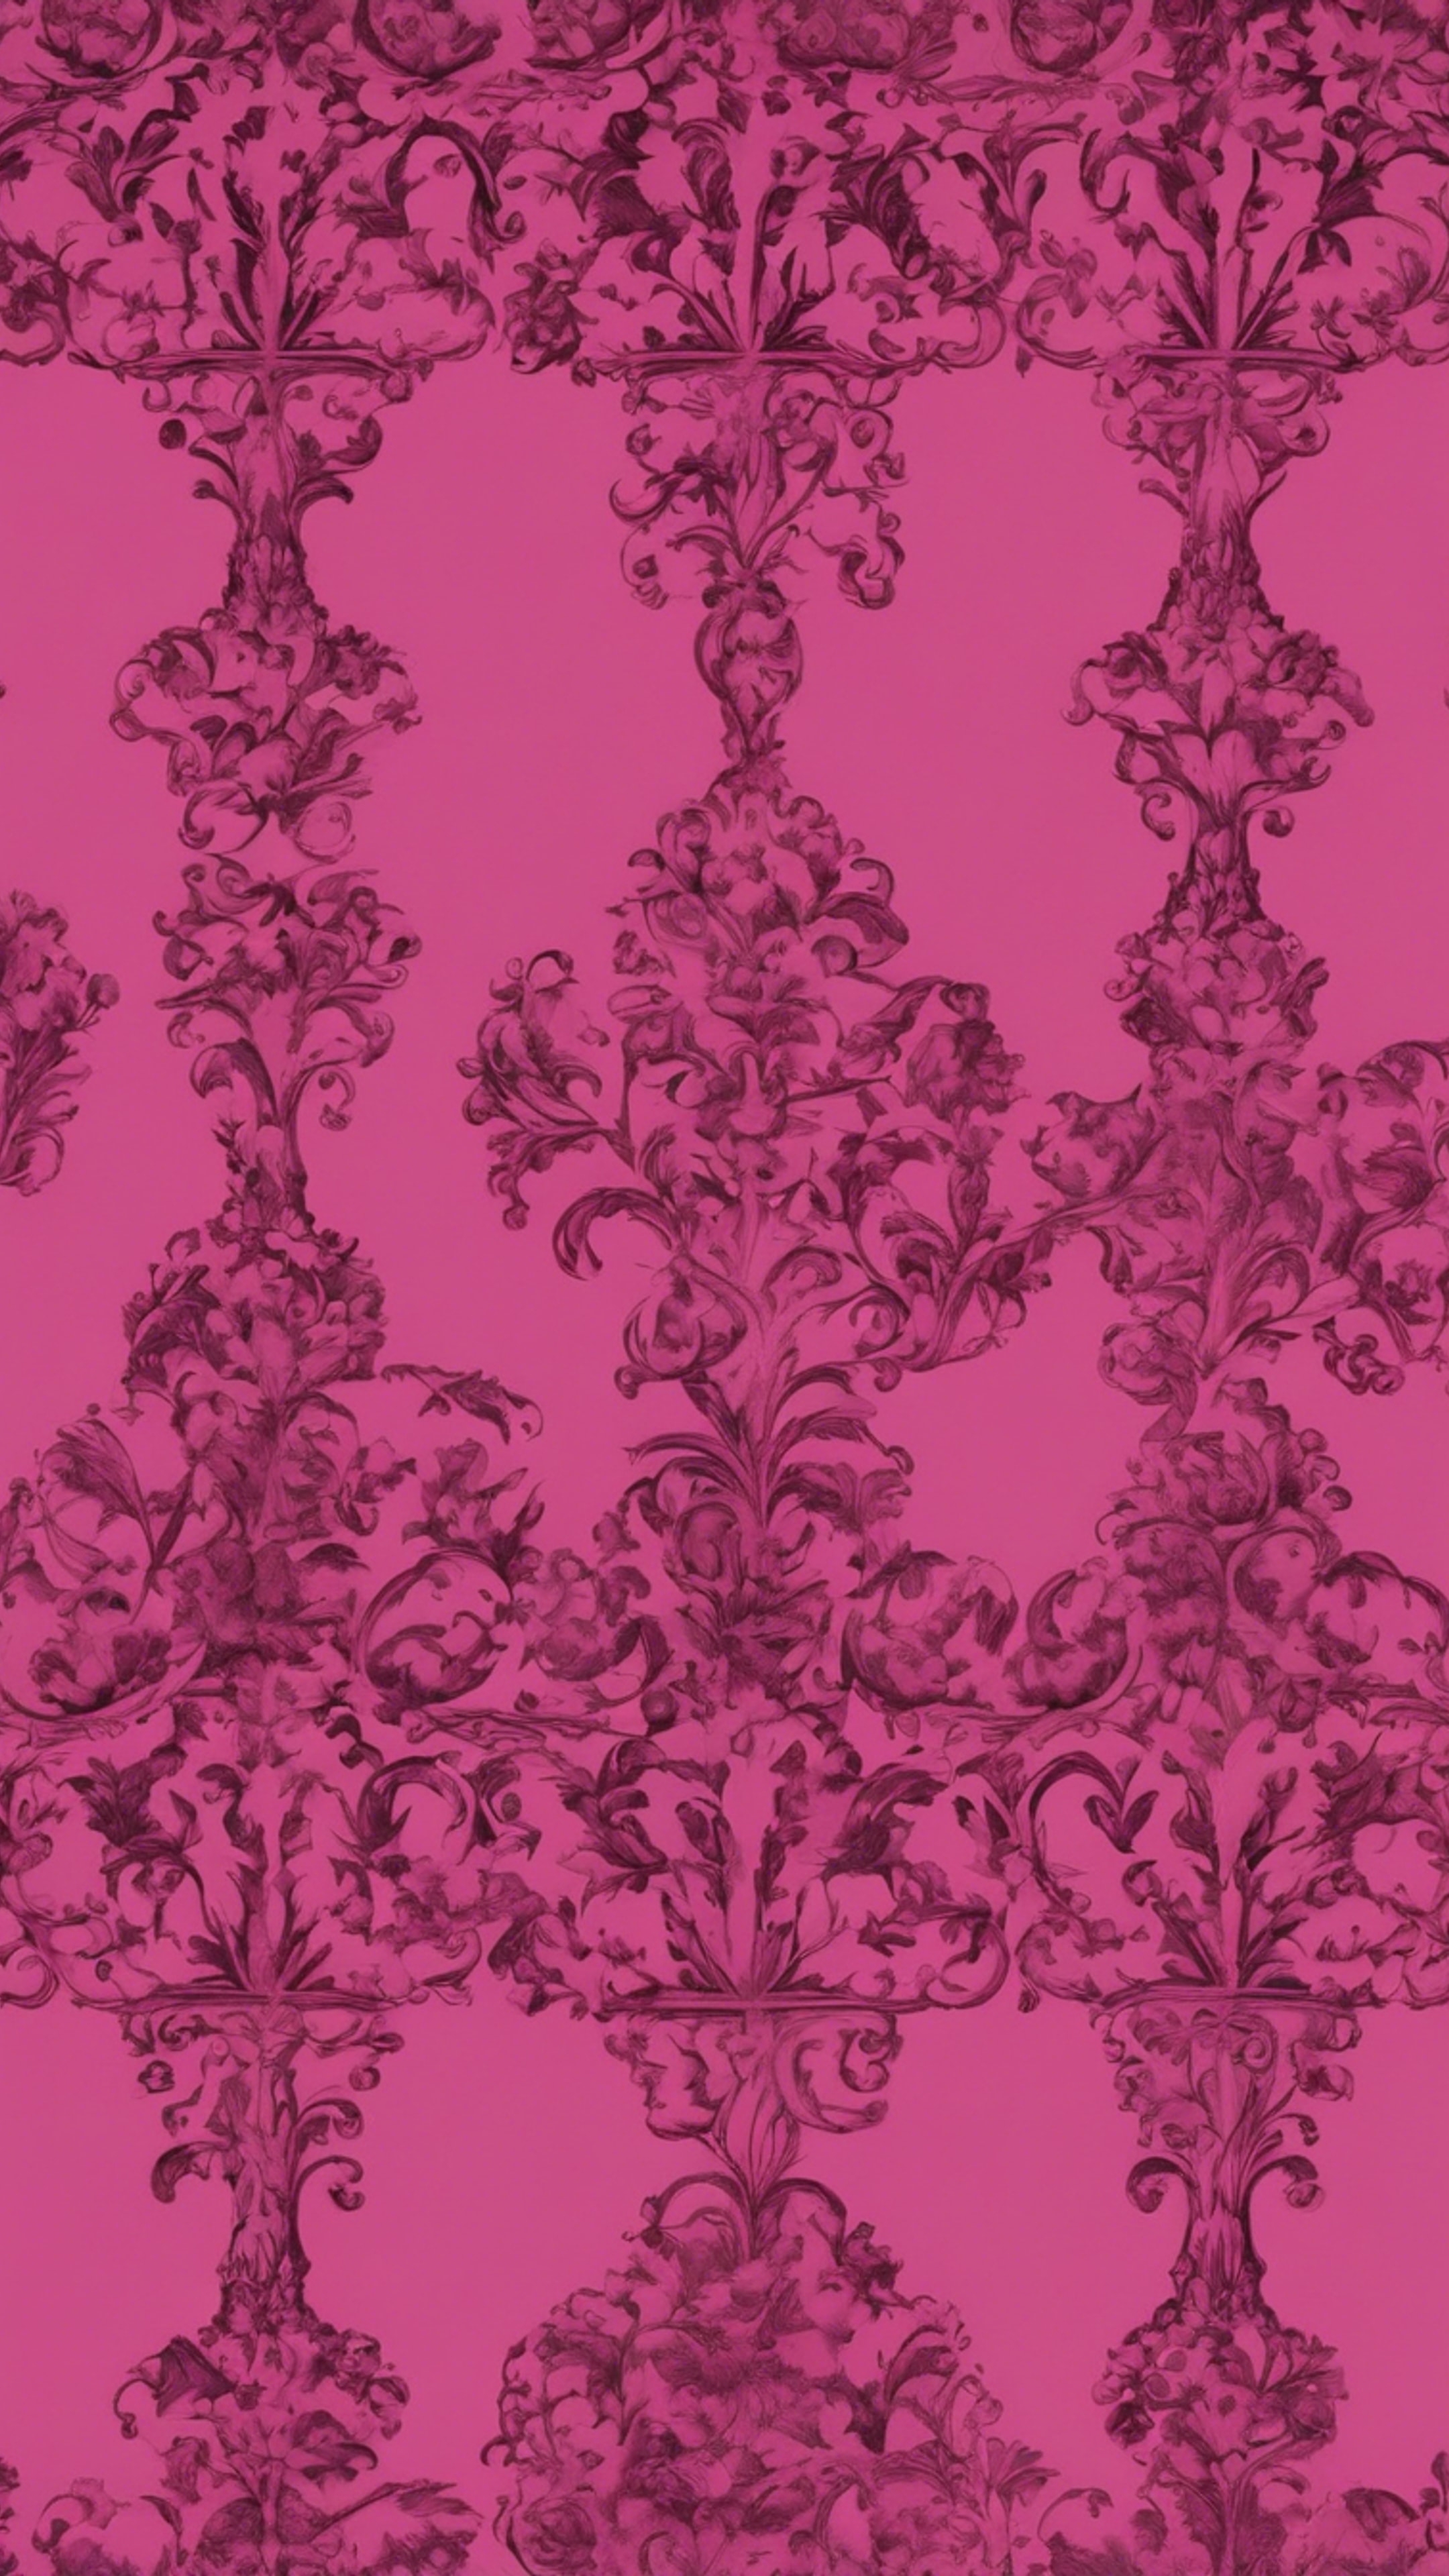 A dark pink Gothic background with baroque patterns. Wallpaper[5770fecf2152499e8904]